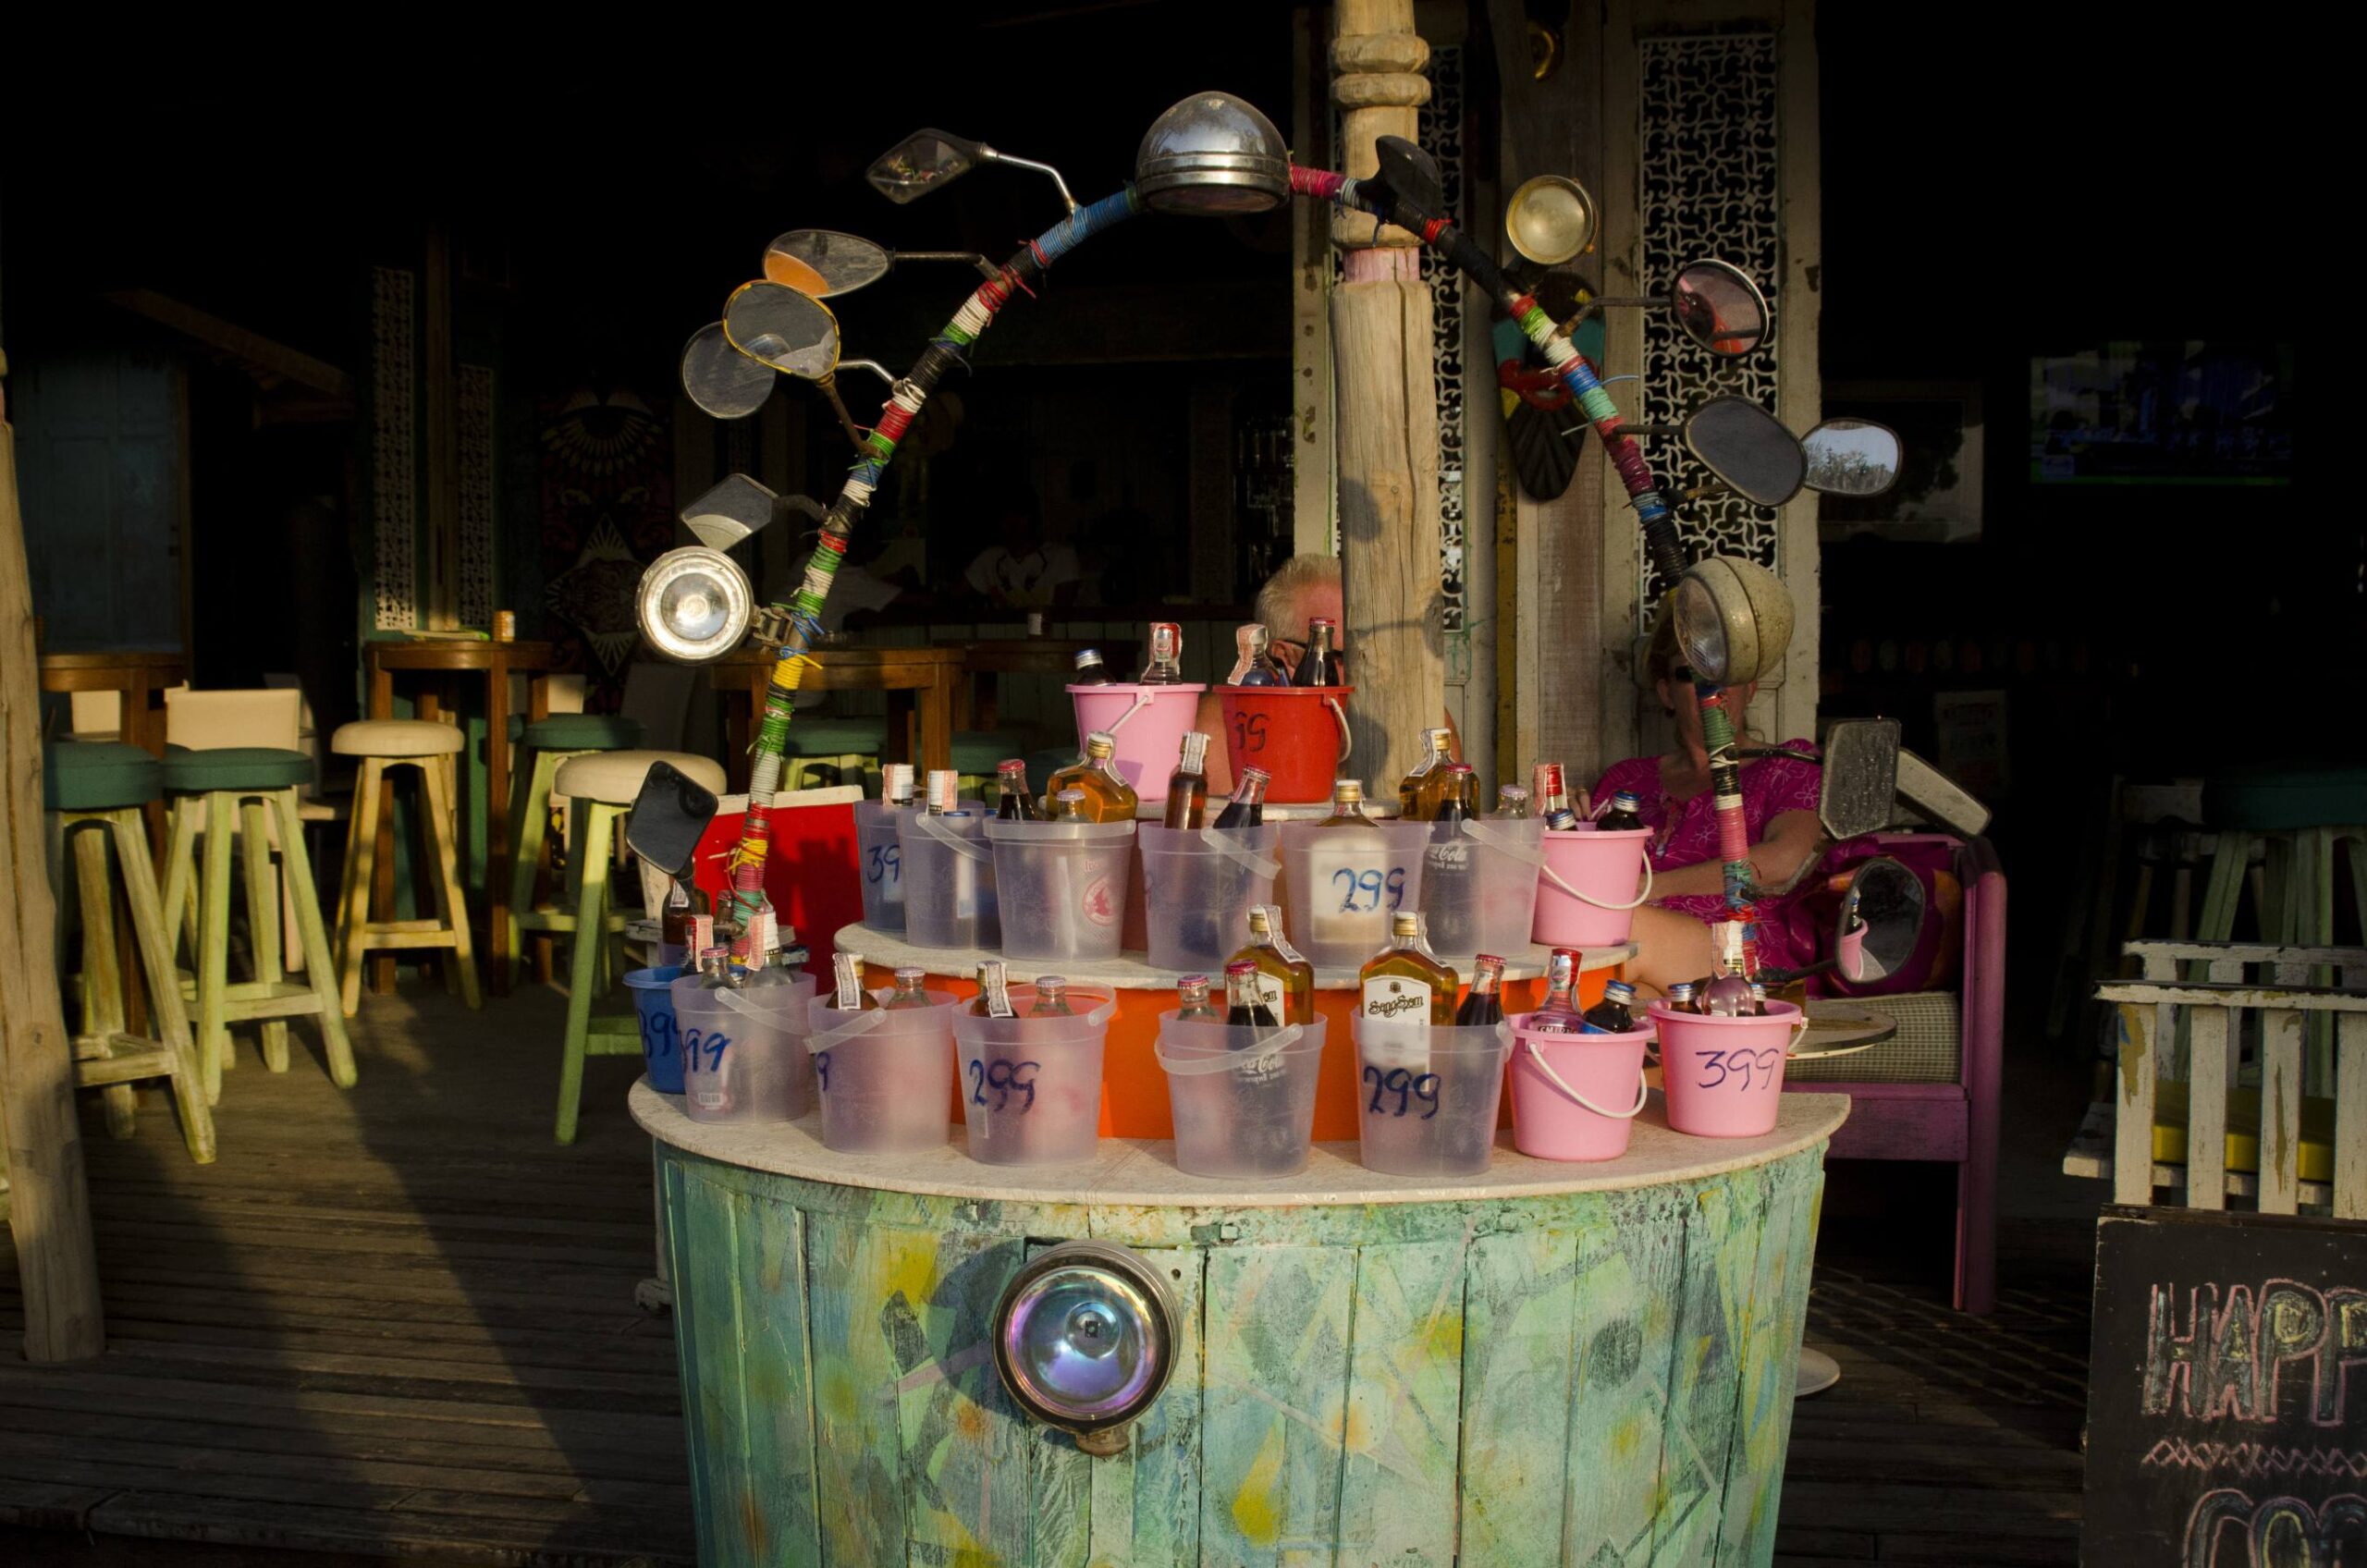 New Years Eve Vacations: The famous buckets on Ko Phangan Island in Thailand